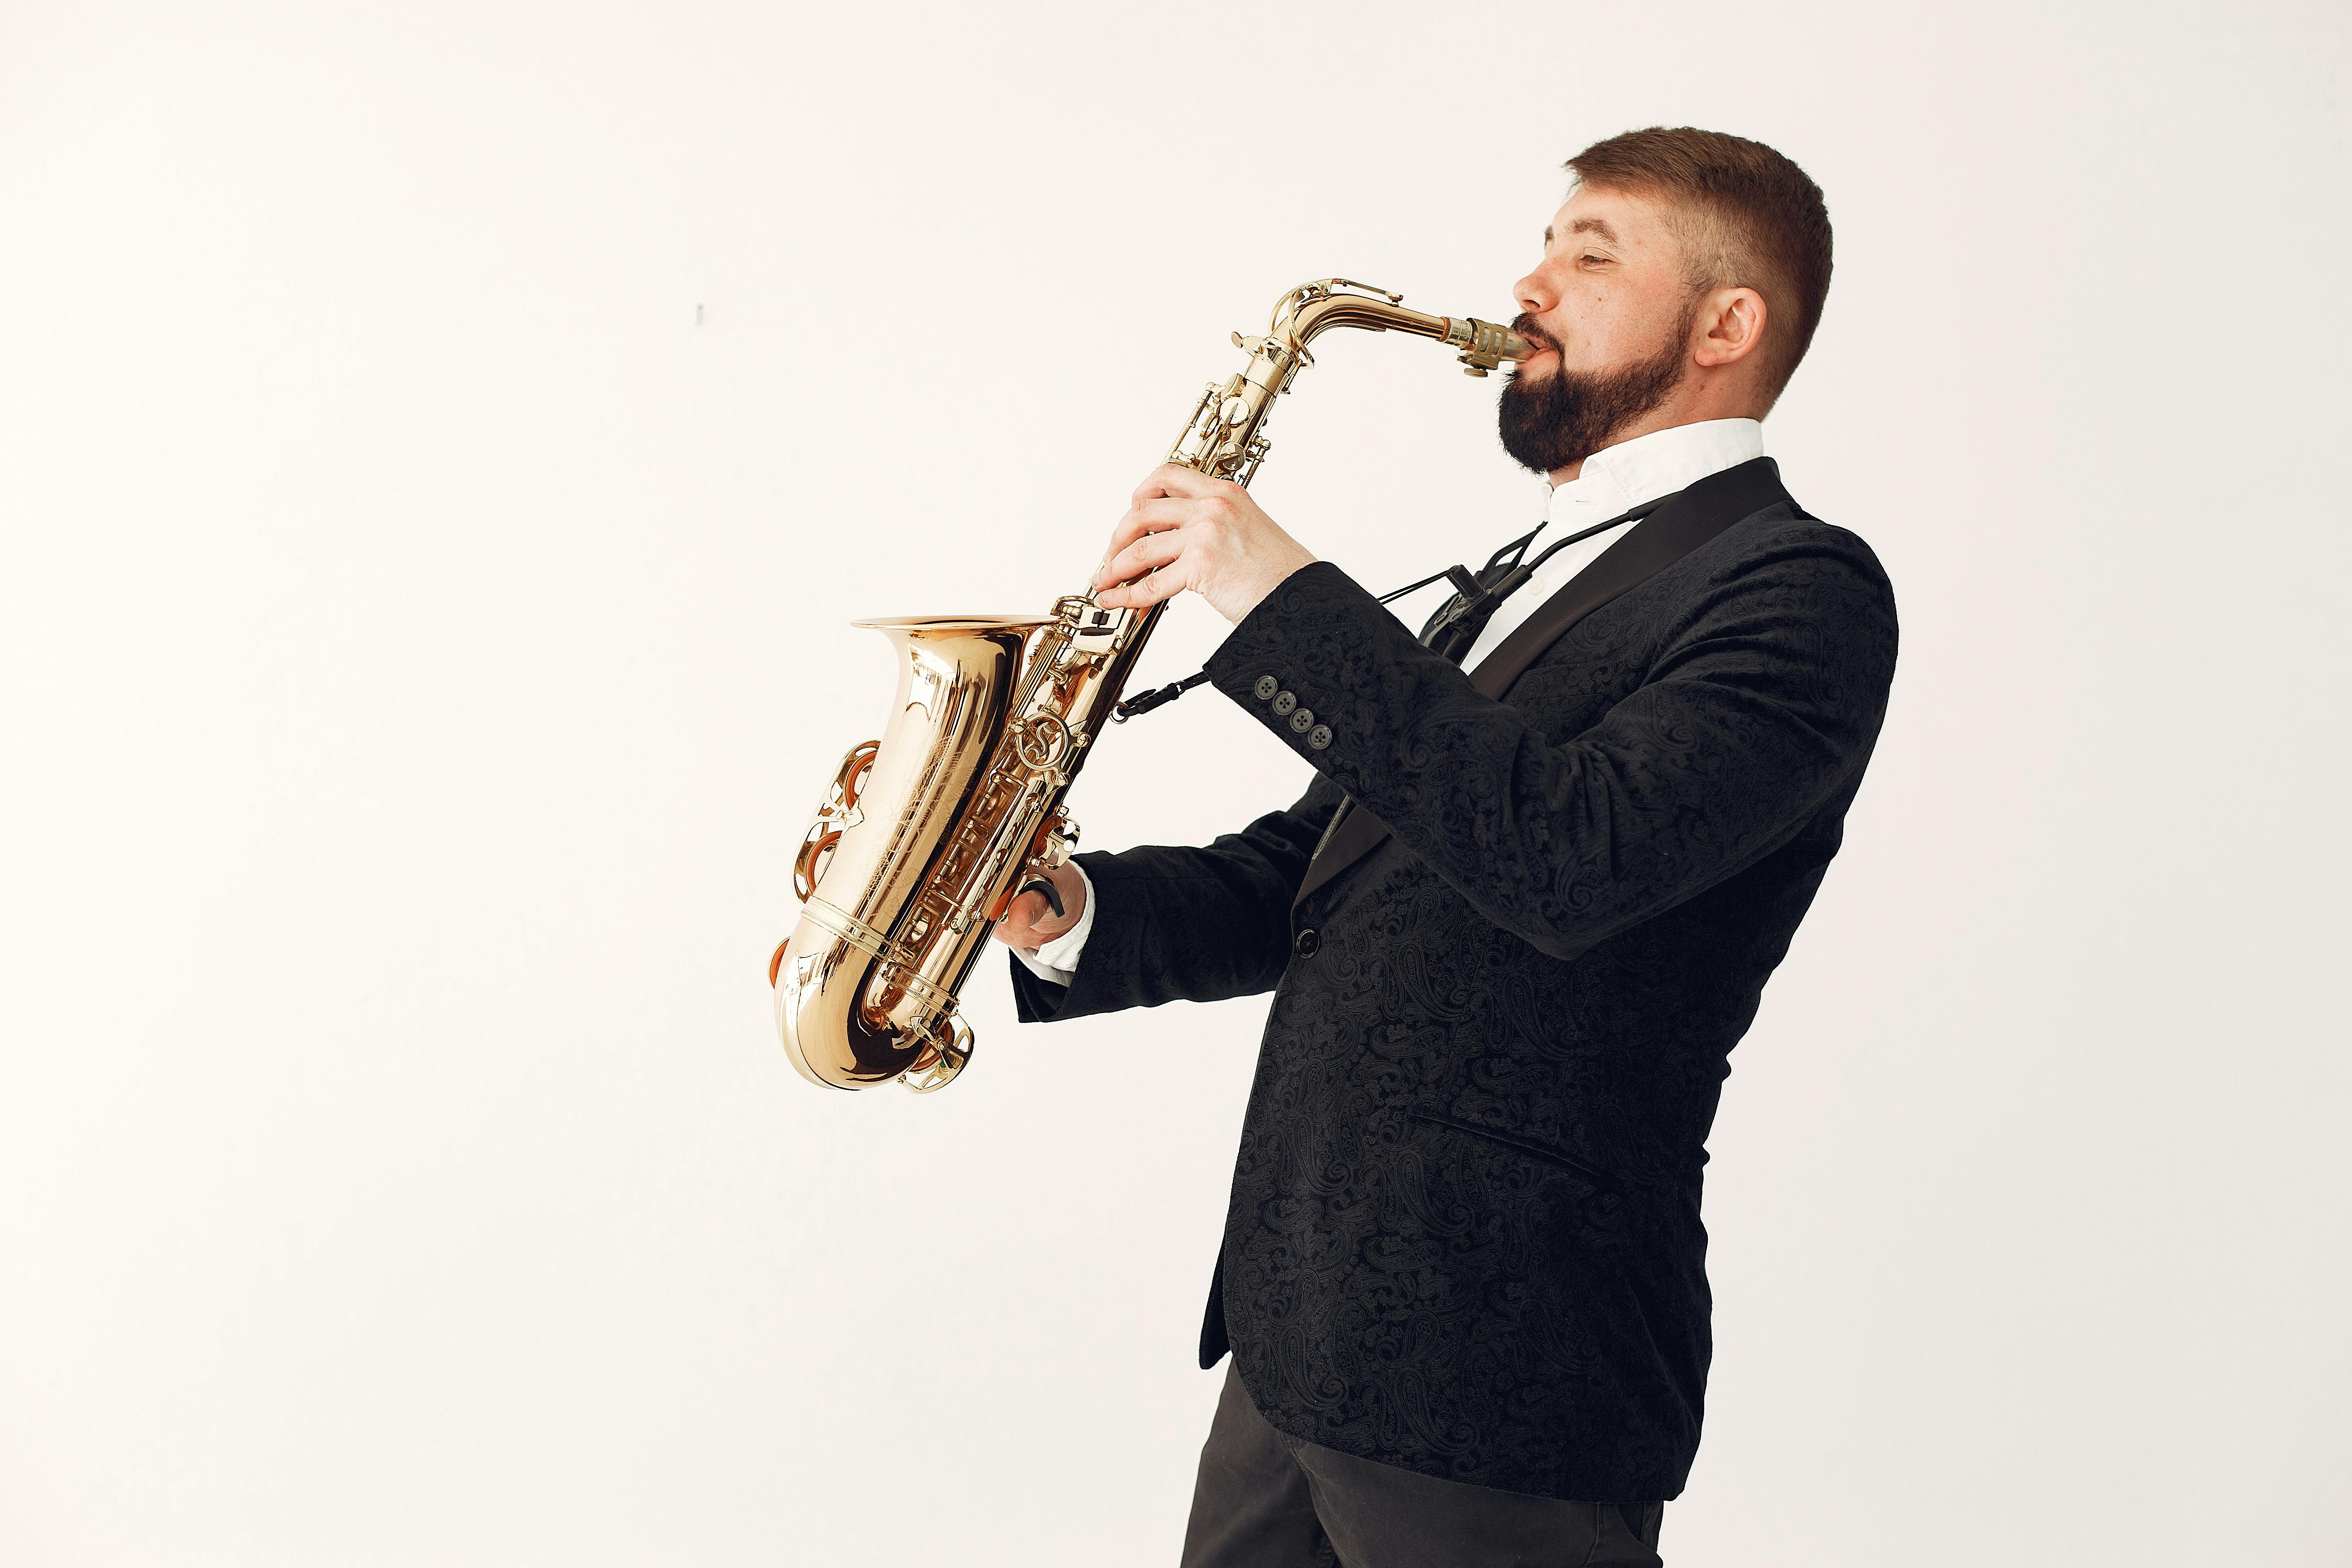 adult man playing saxophone during rehearsal isolated on white background